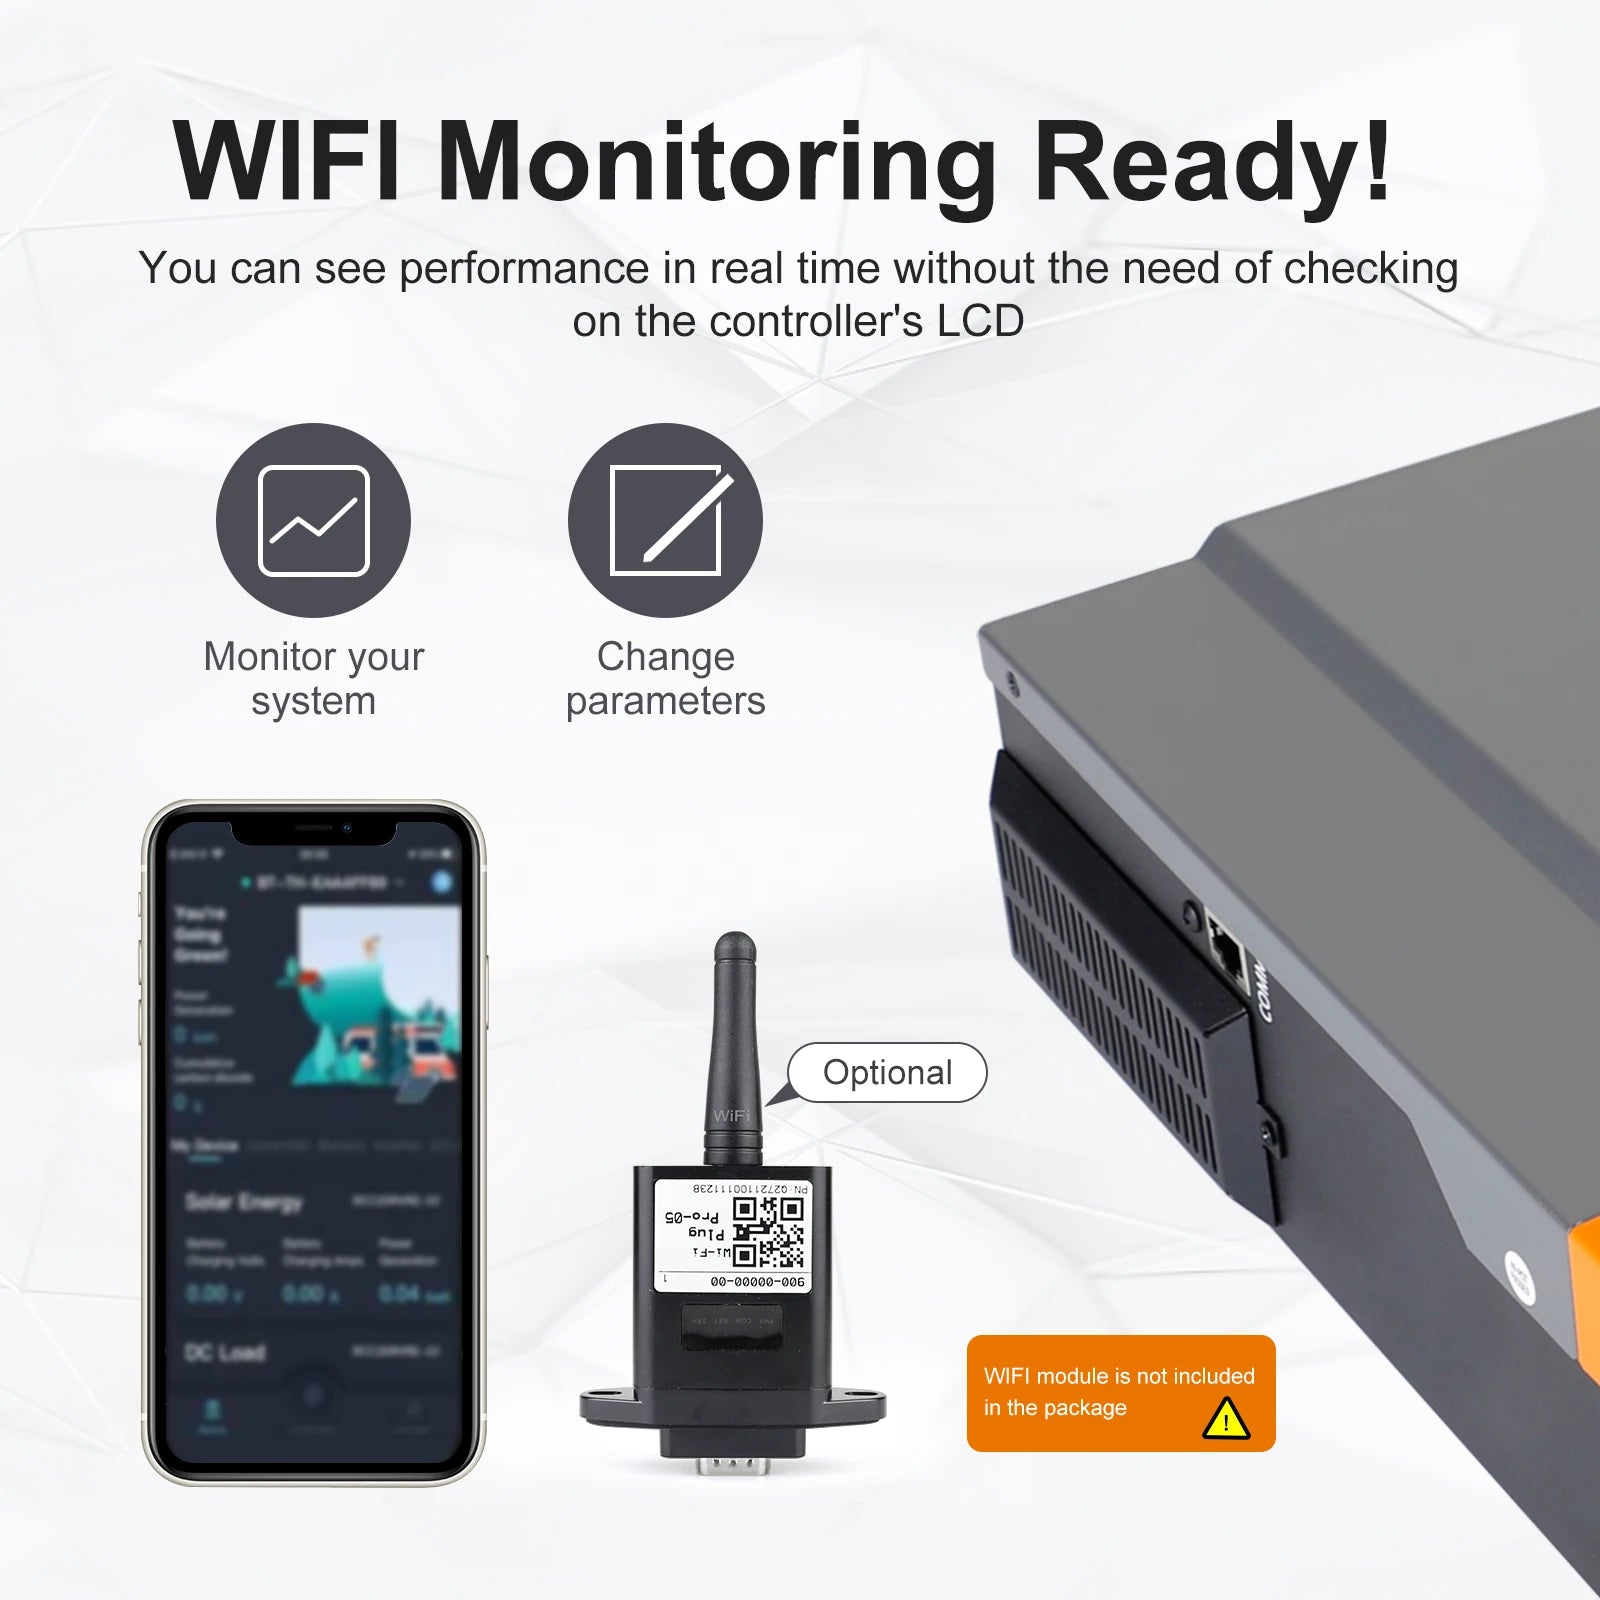 PowMr 3.2KW Hybrid Solar Inverter, Real-time system performance monitoring via WiFi, no LCD required; adjust settings as needed (WiFi module not included).